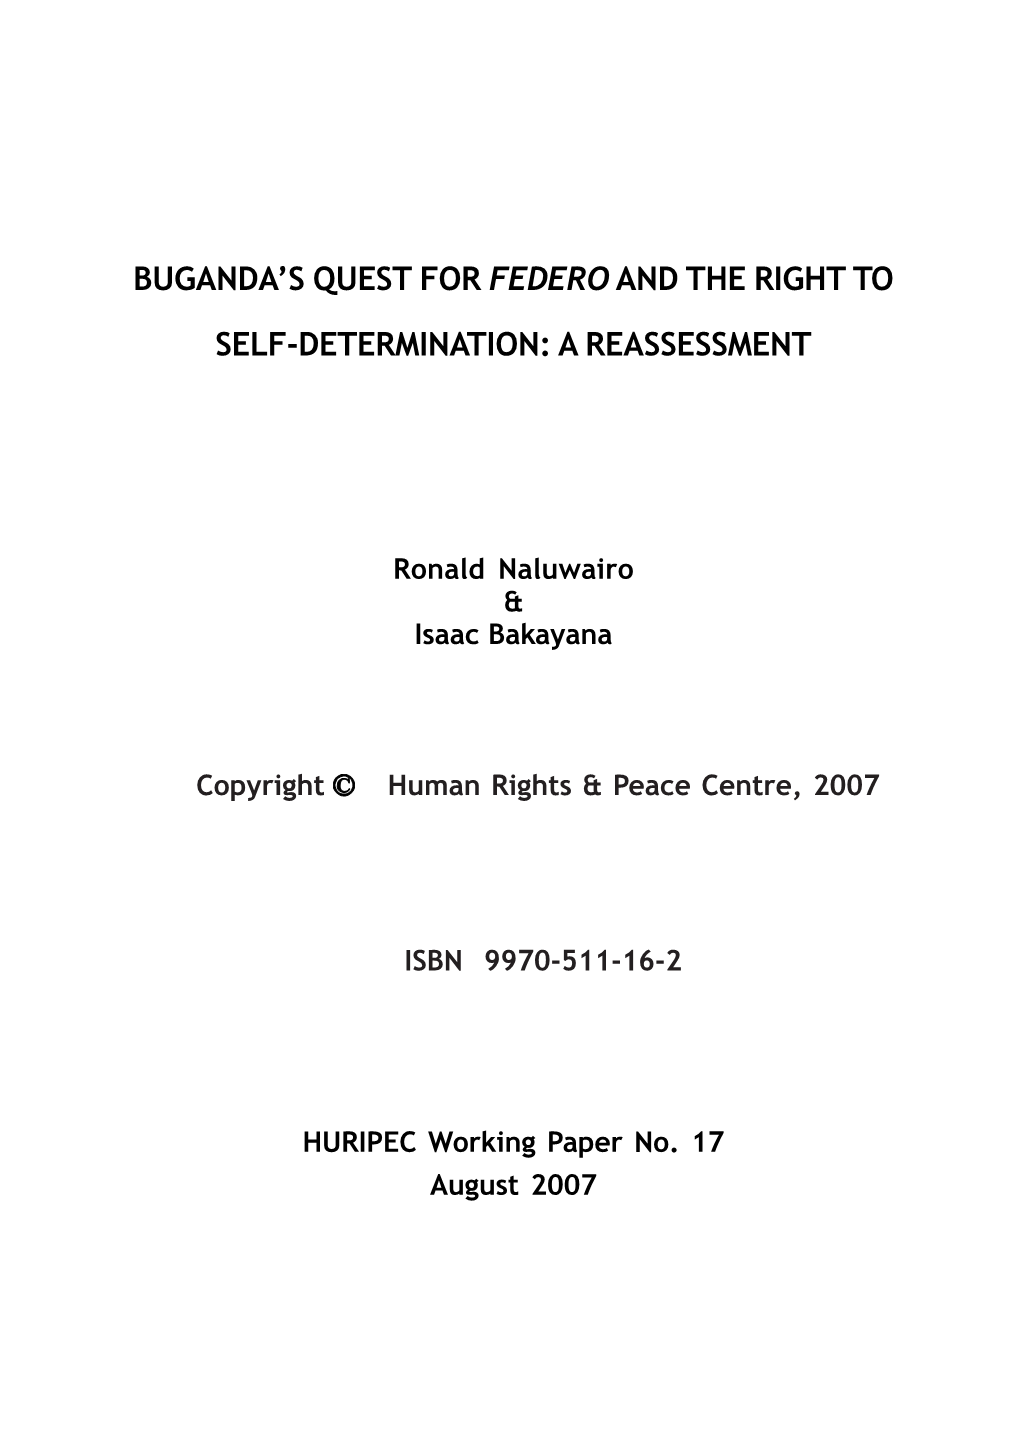 Buganda Quest for Federo and the Right to Self-Determination